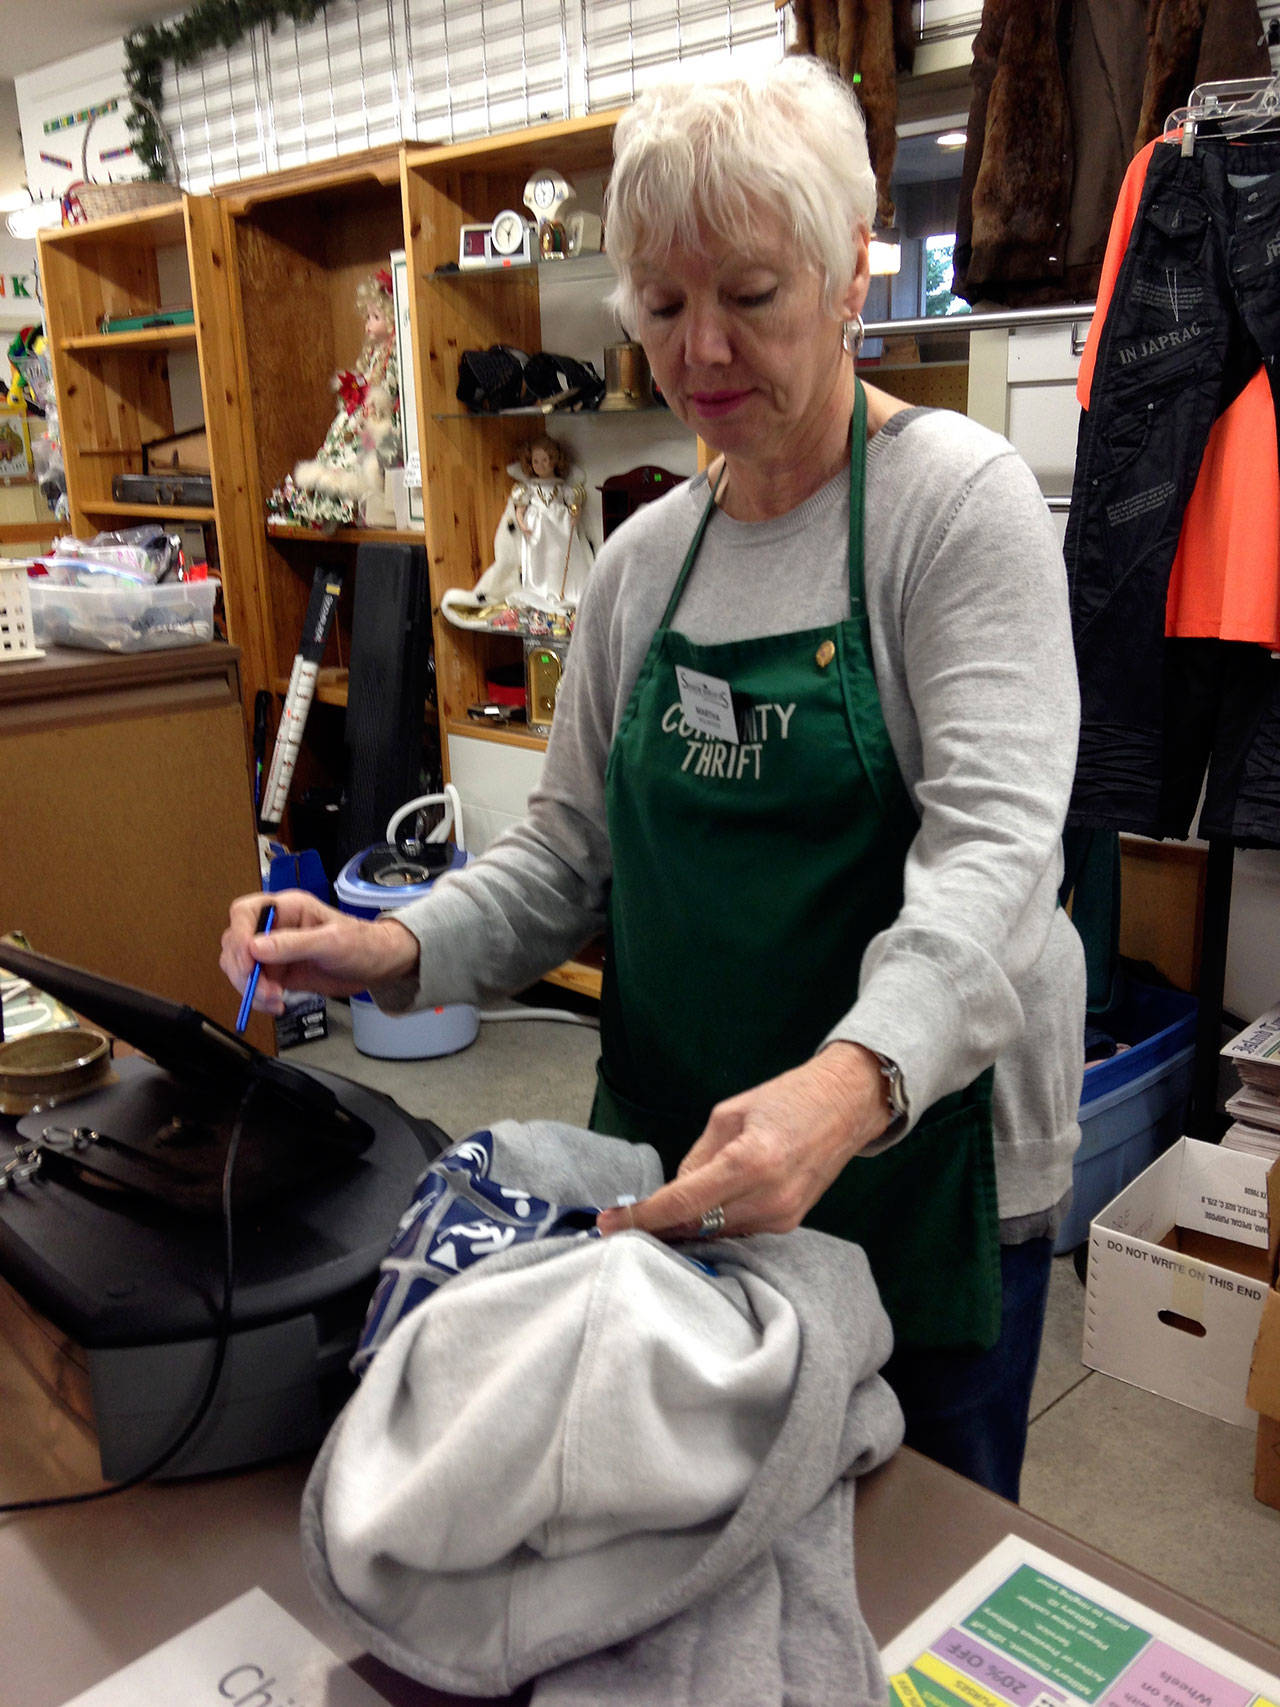 A volunteer rings up a purchase at Senior Thrift, which is operated by Island Senior Resources as a revenue source to support its numerous programs and services. The nonprofit agency’s “Together We Care,” campaign is attempting to raise $10,000 on Aug. 1. (Photo provided)